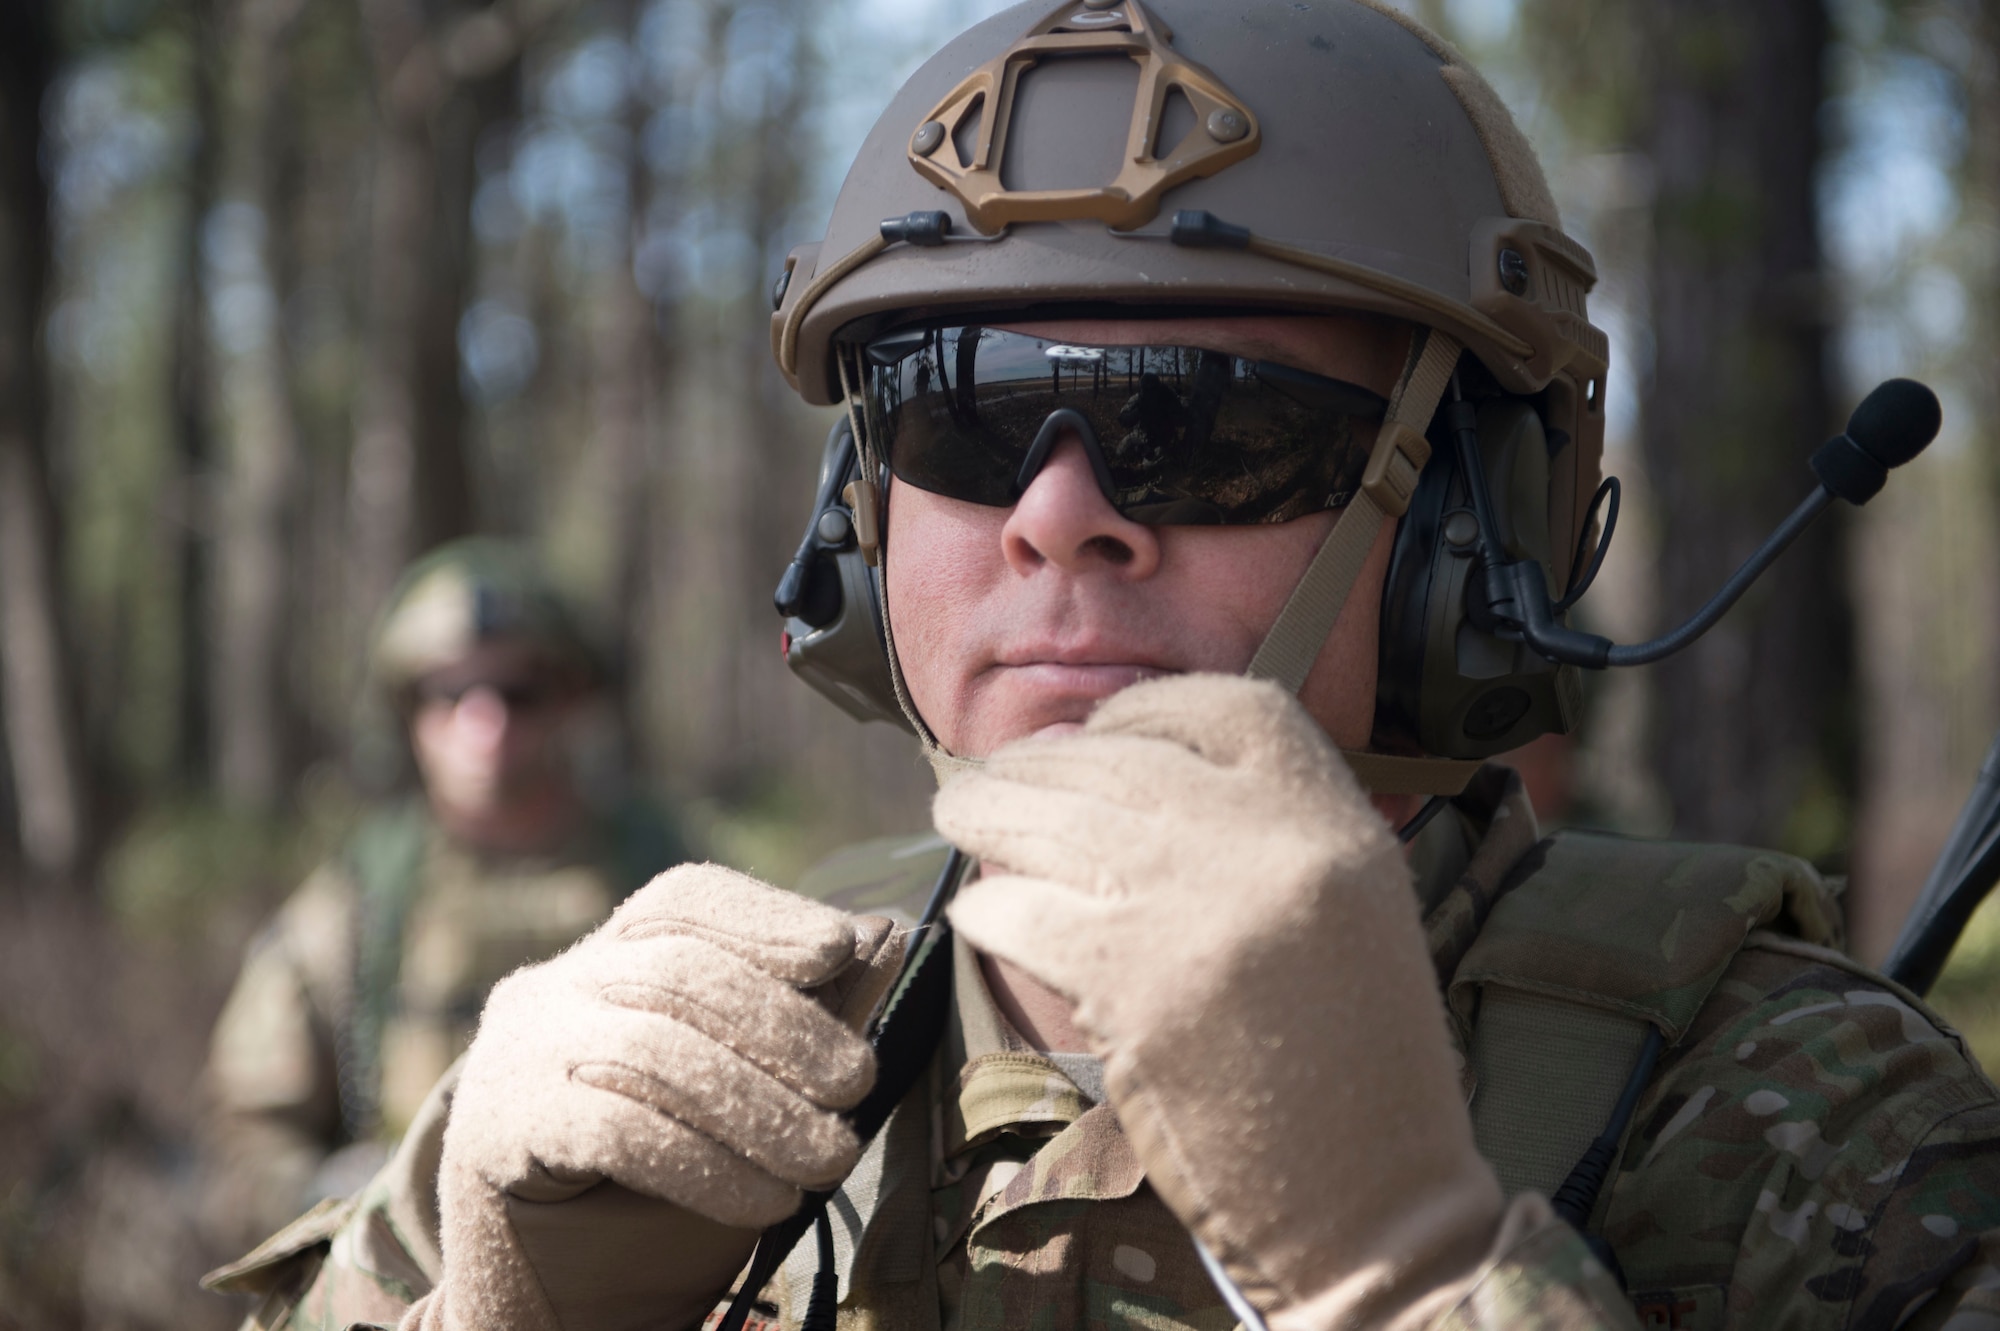 U.S. Air Force Maj. Ryan Schenk, 621st Mobility Support Operations Squadron air mobility liaison officer assigned to the 101st Airborne Division at Fort Campbell, Ky., adjusts his helmet while waiting for the airfield to be cleared during a mobility exercise called WAREX at Joint Base McGuire-Dix-Lakehurst, N.J., March 13, 2017. AMLOs are highly experienced, U.S. Air Force pilots and navagators embedded with Army and Marine units, in-garrison and deployed. (U.S. Air Force photo by Tech. Sgt. Gustavo Gonzalez/RELEASED)